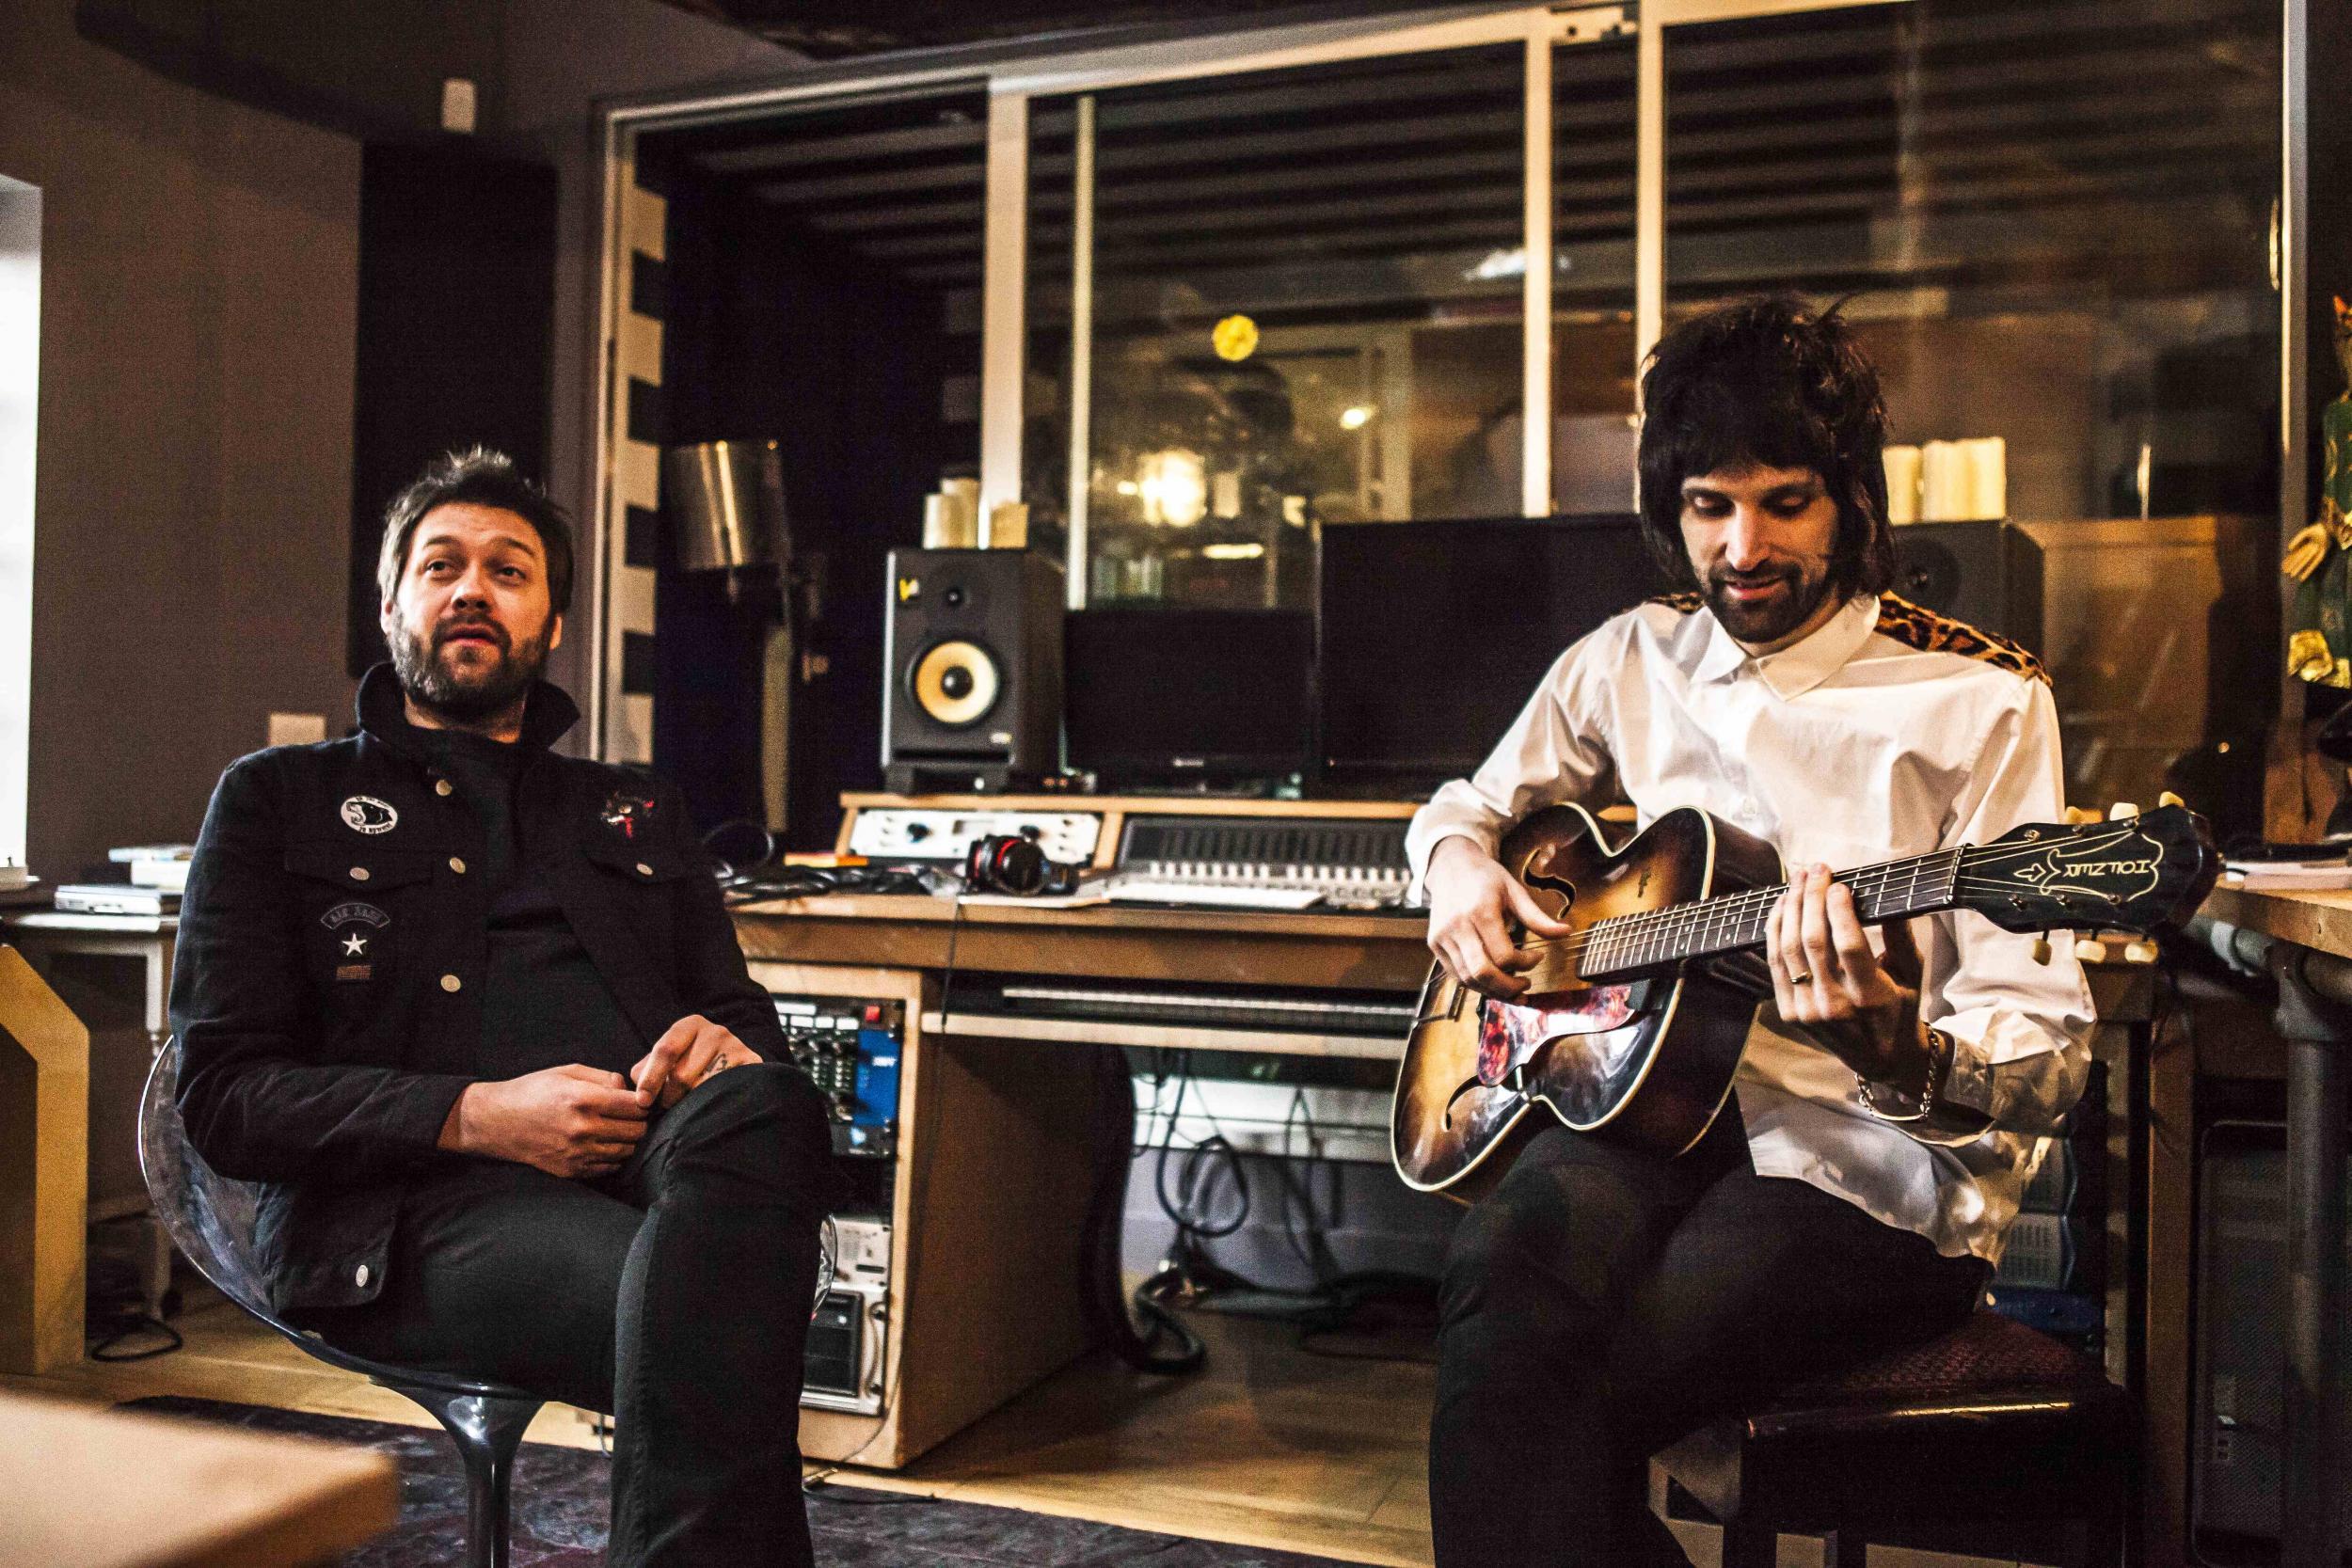 Tom Meighan and Serge Pizzorno in the studio